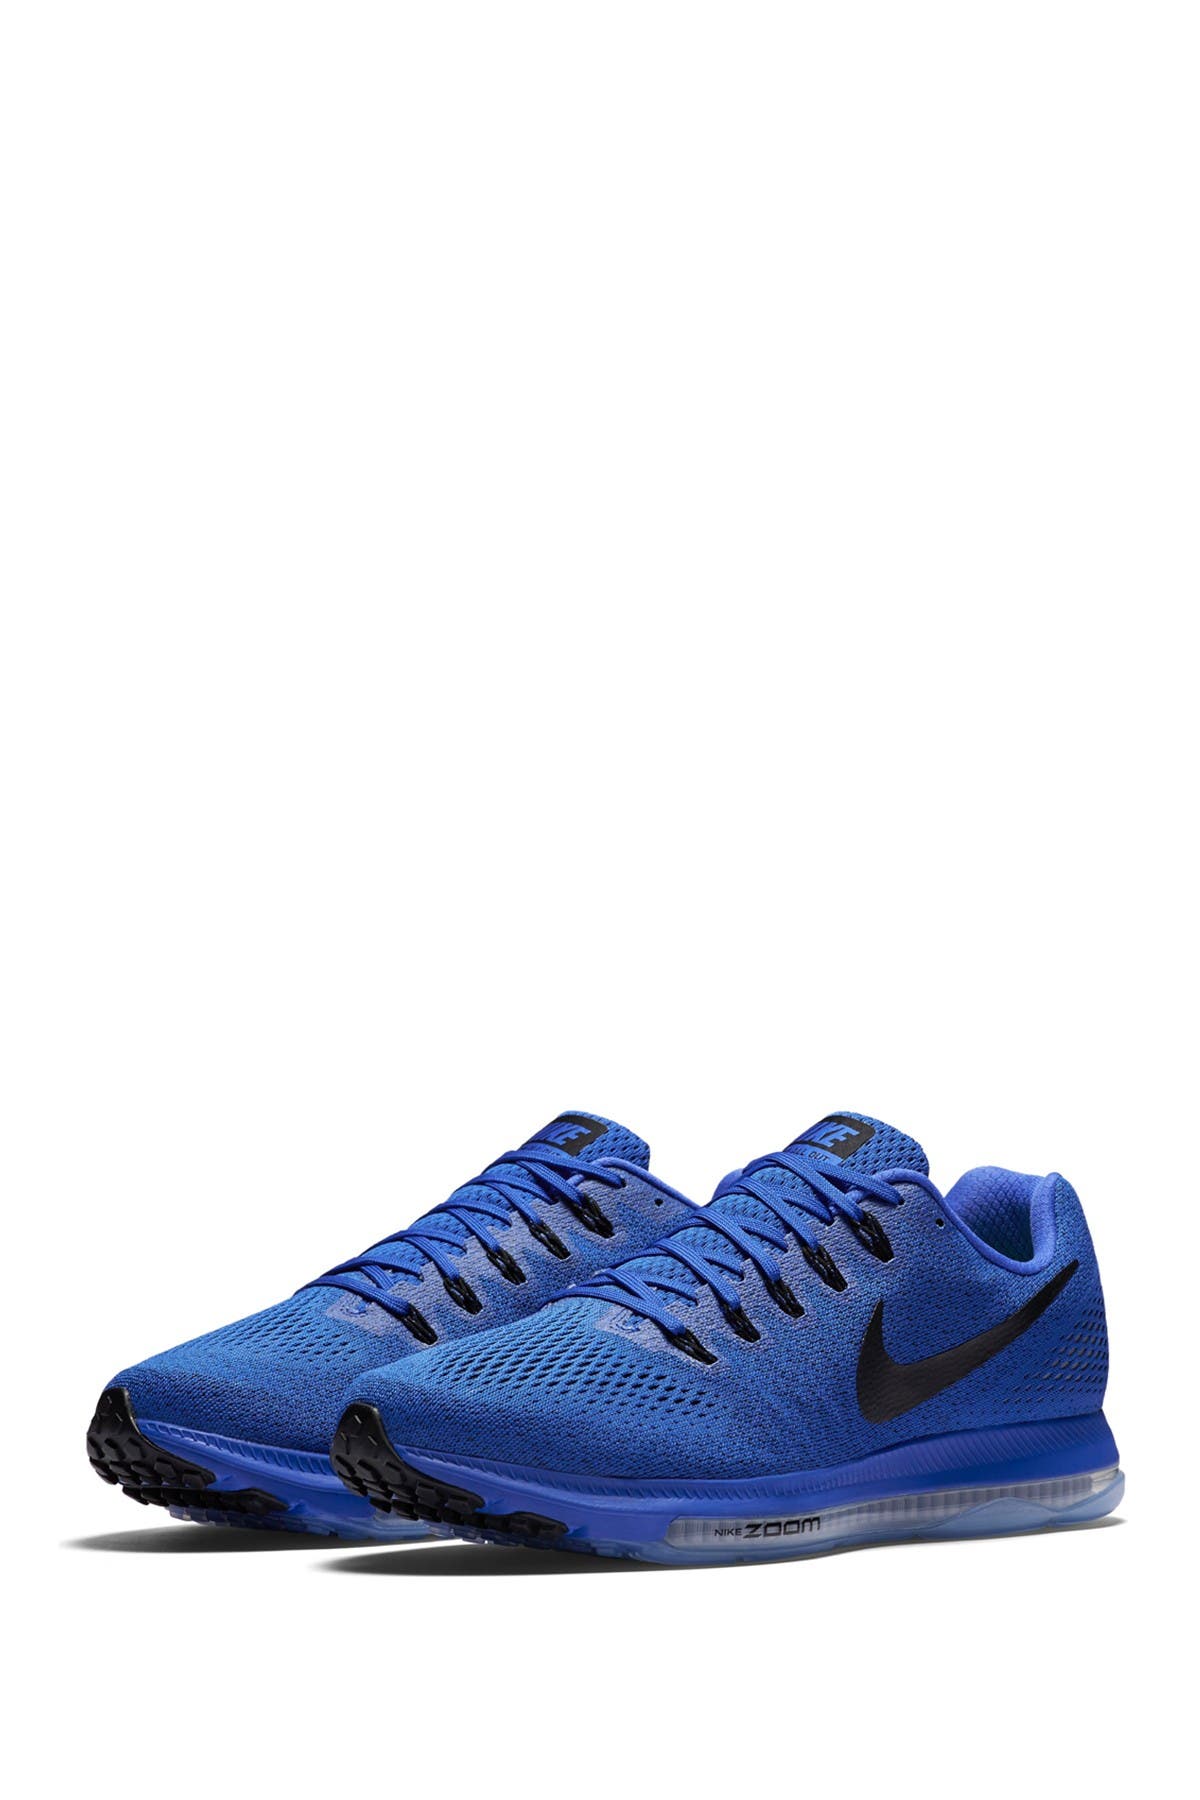 nike zoom all out low 1